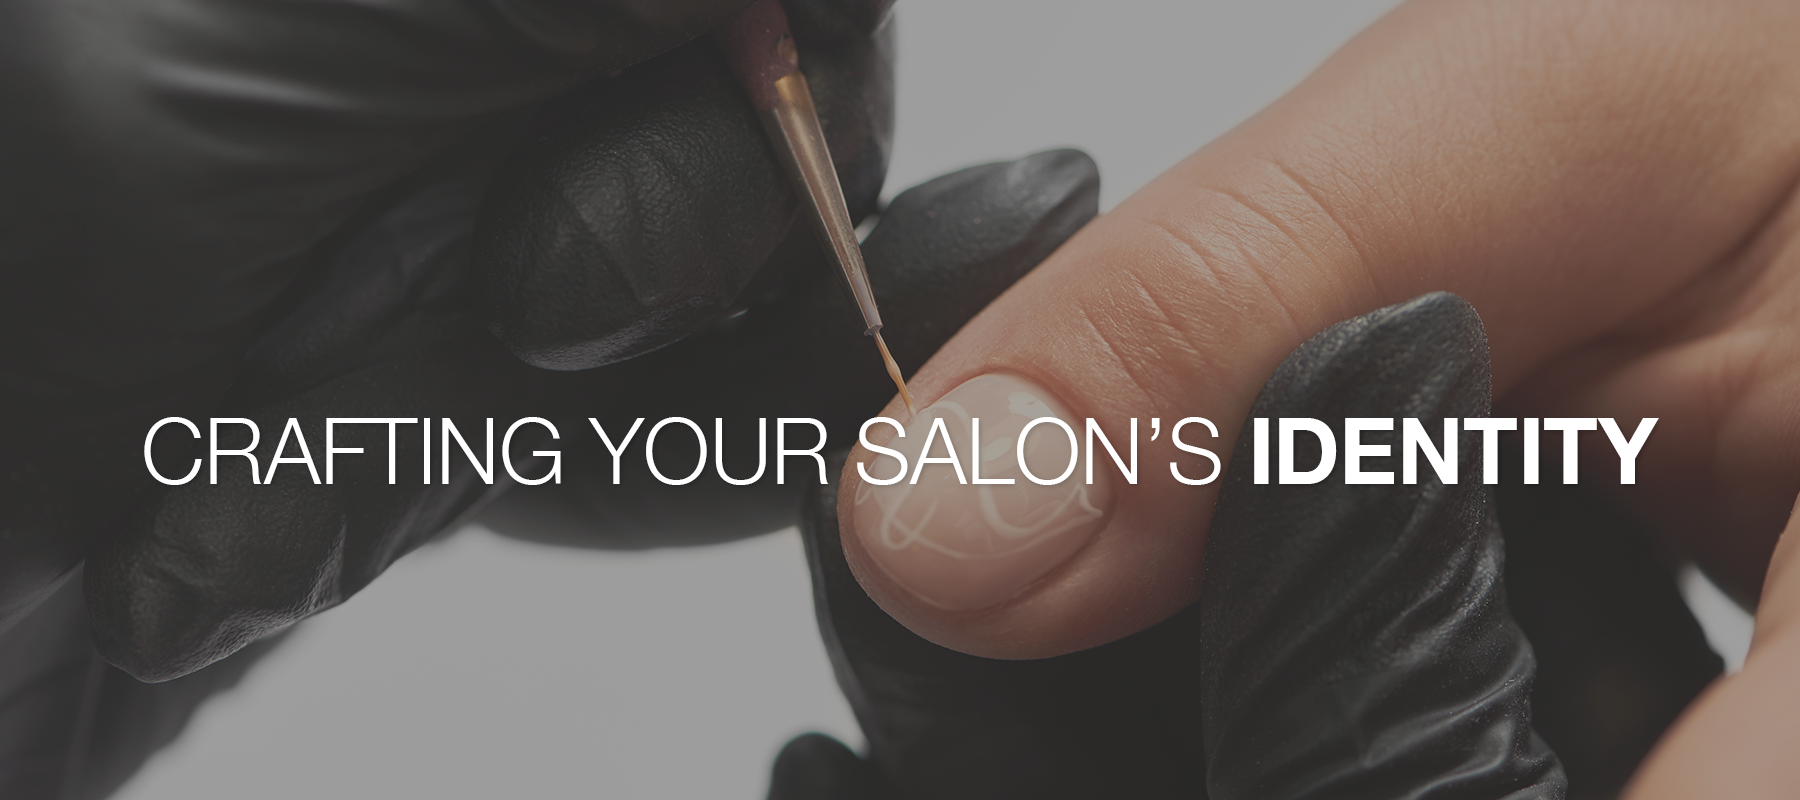 Crafting Your Salon's Identity: Creating a Unique Brand in the Nail Industry